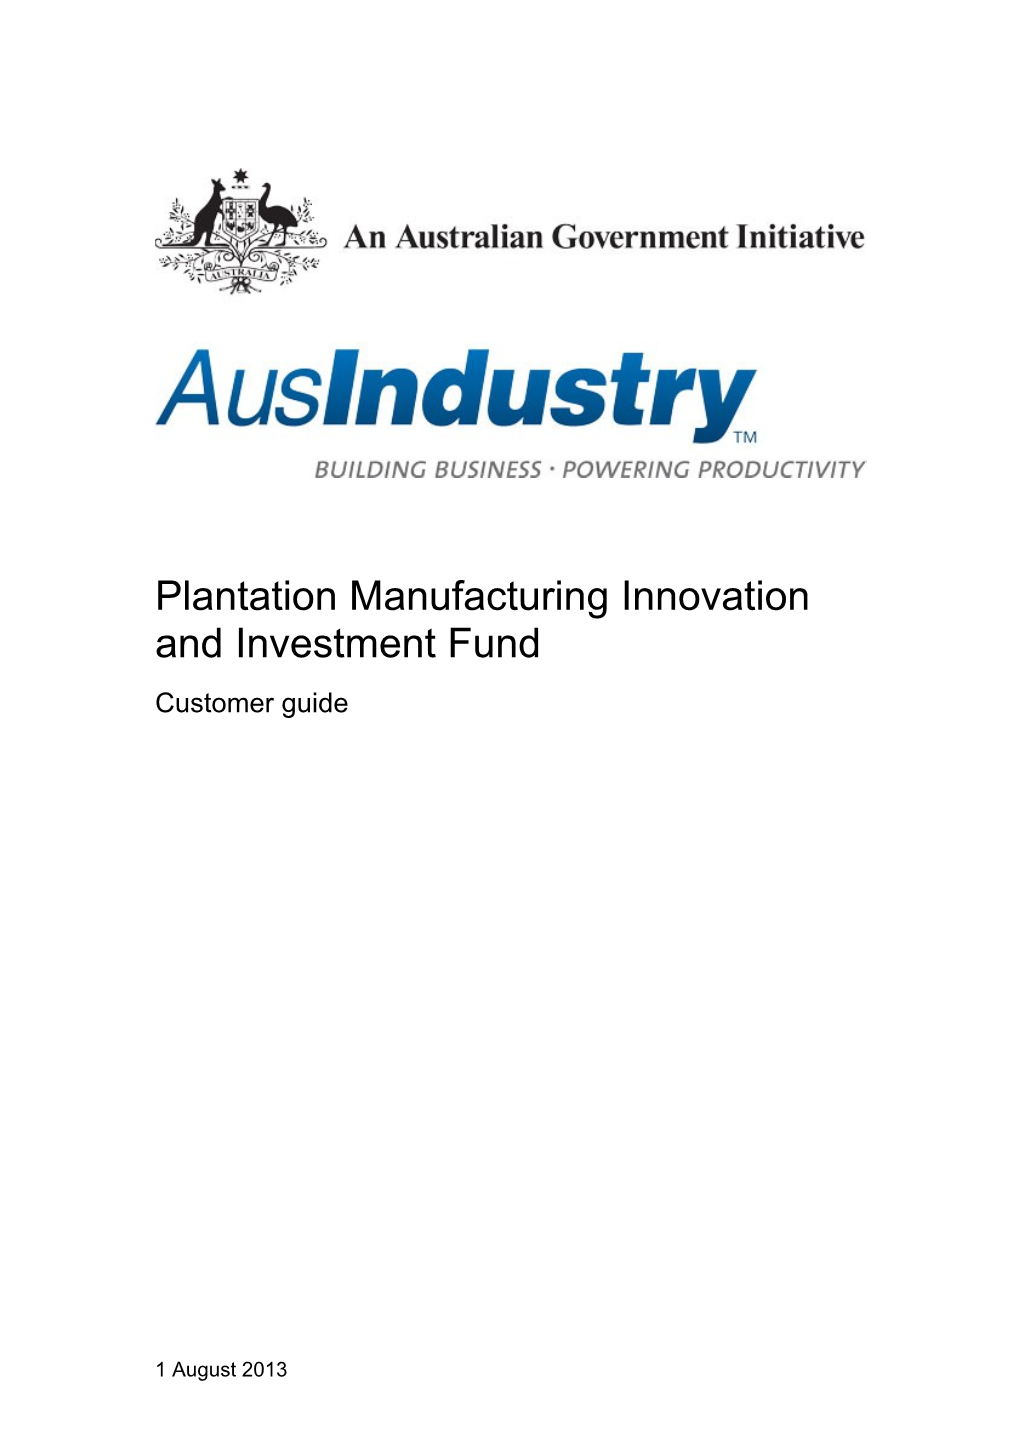 Plantation Manufacturing Innovation and Investment Fund Customer Guide